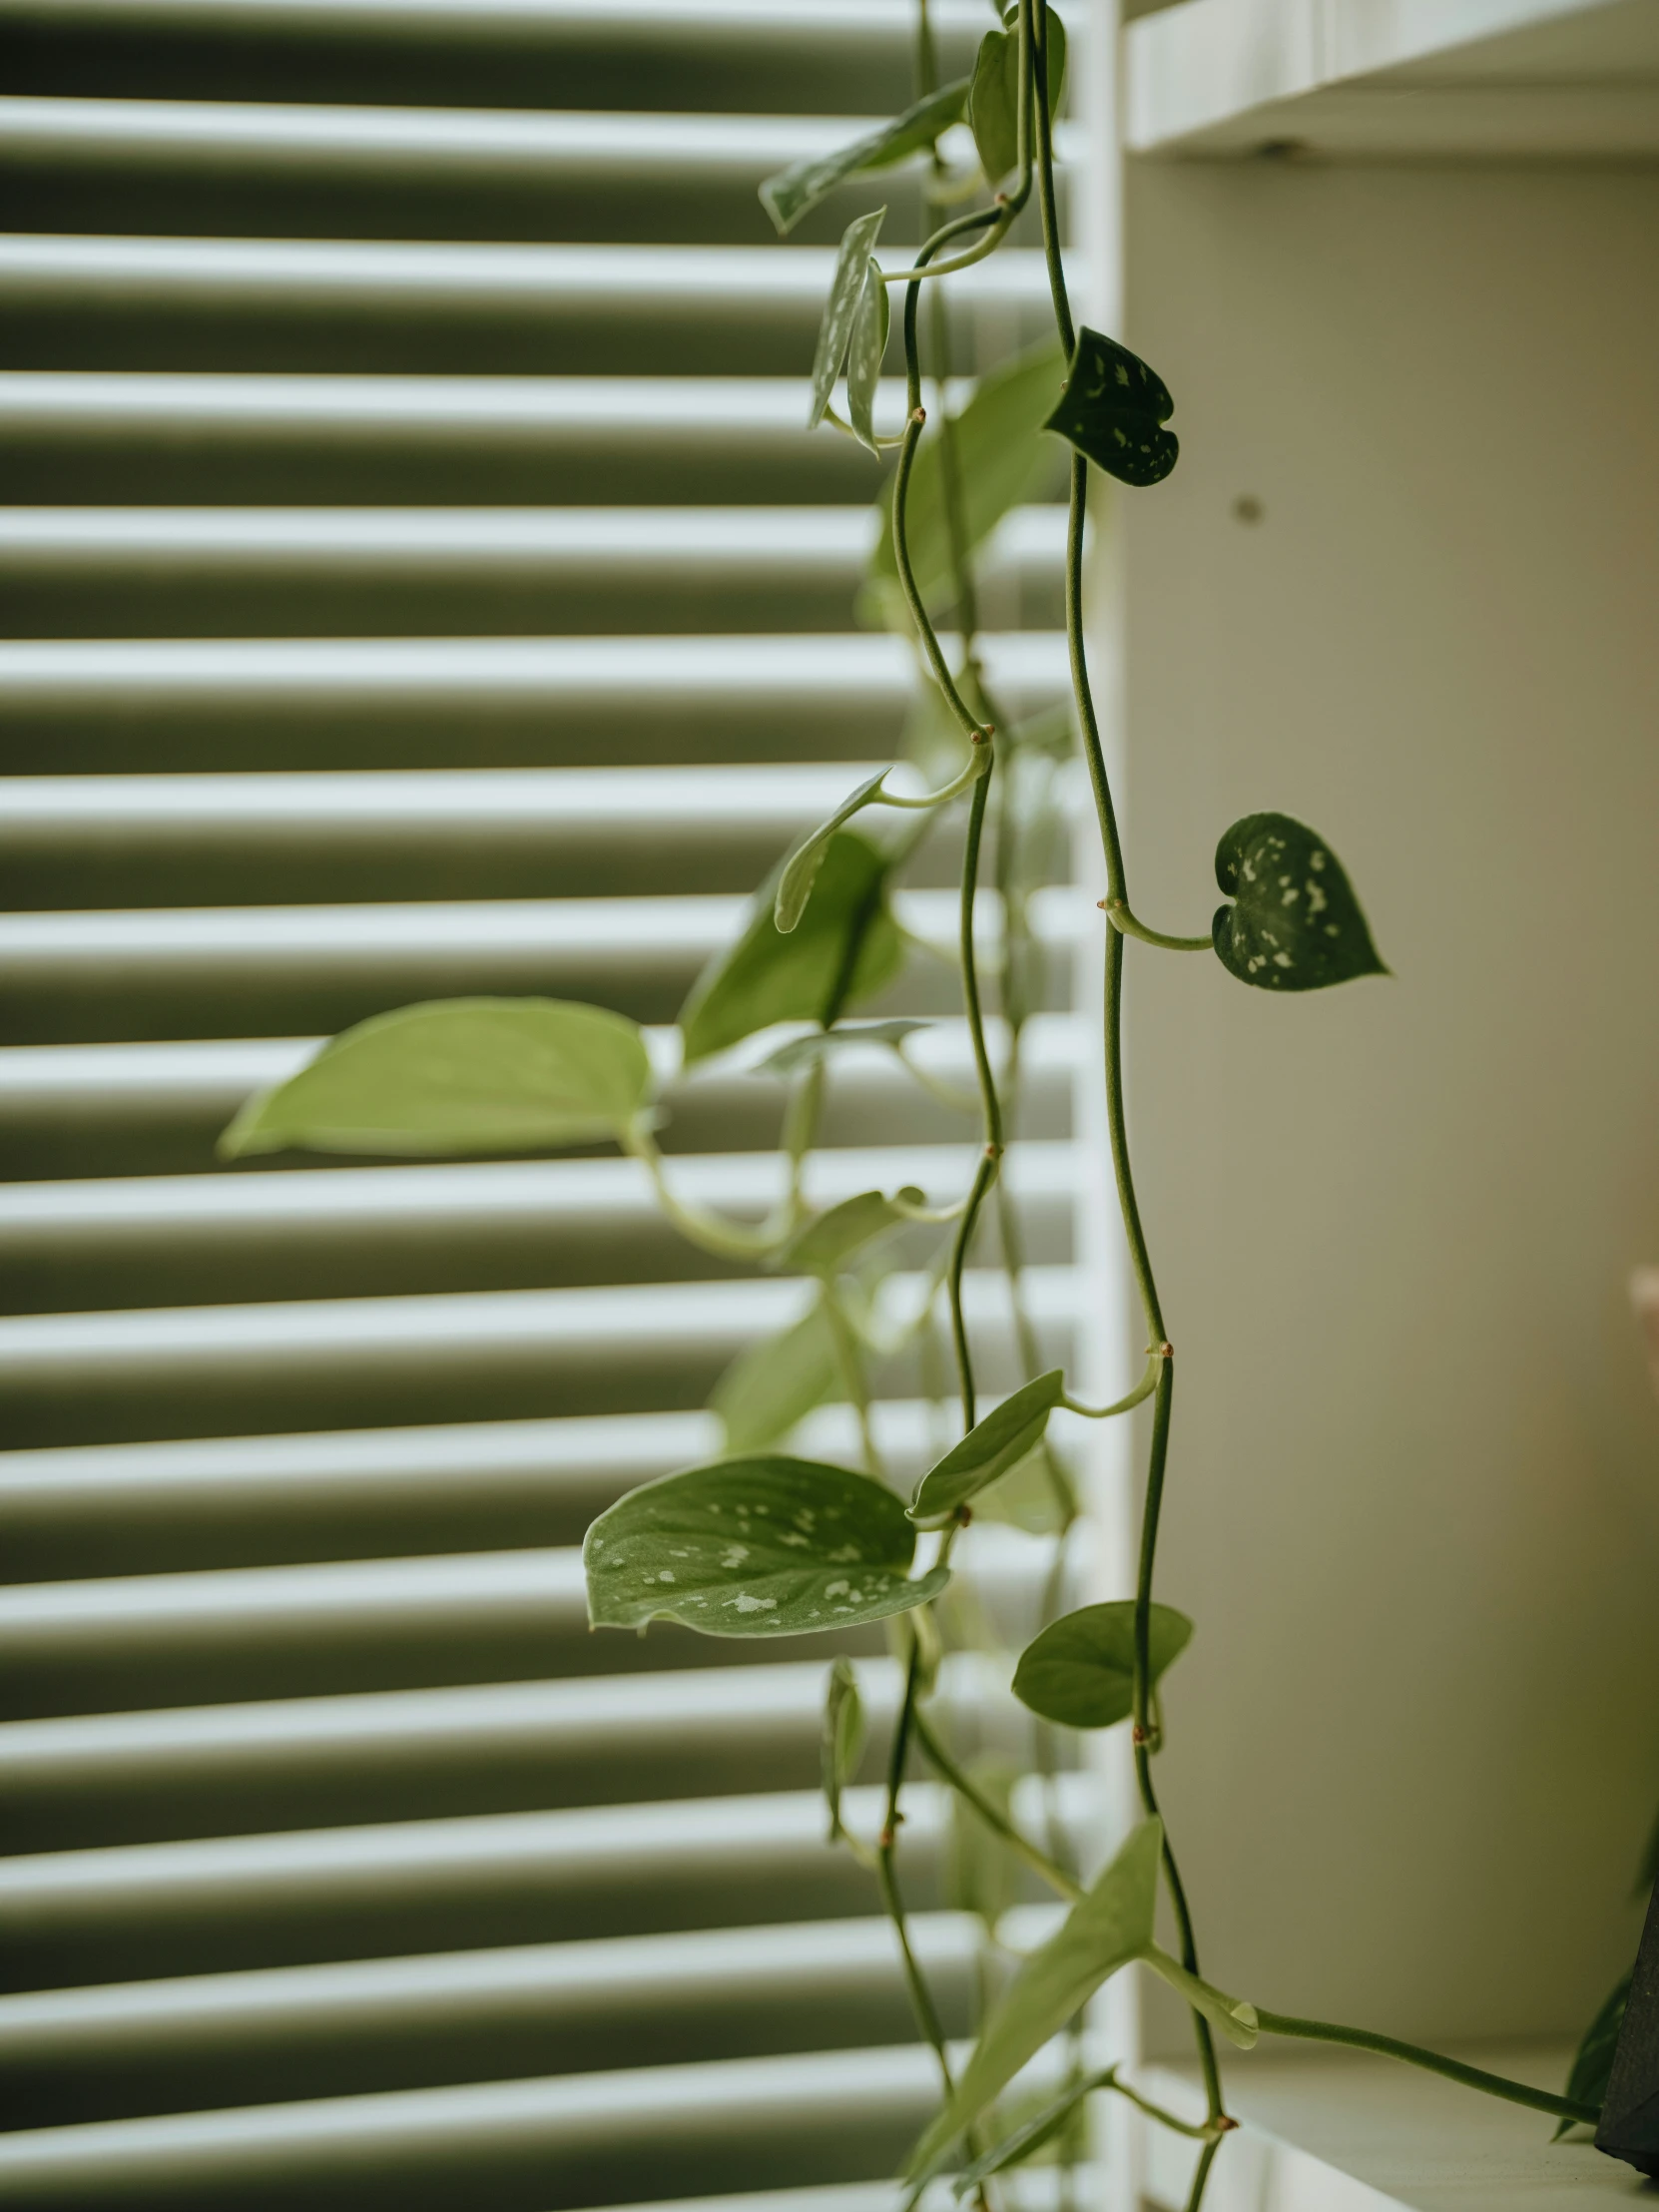 plants hanging off the side of a window sill